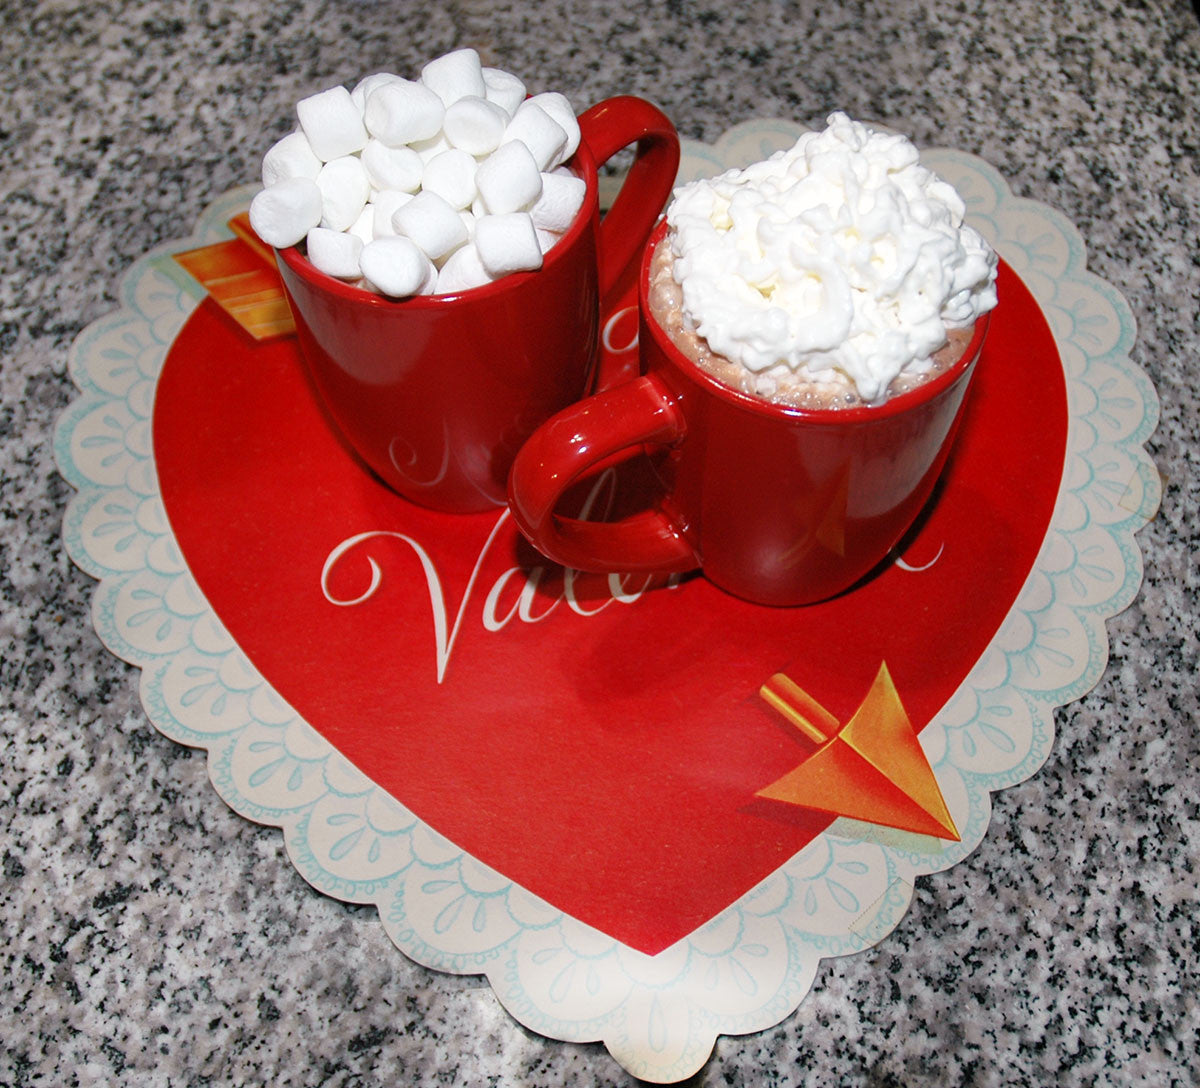 Mom's Hot Chocolate for Those We Love on Valentine's Day